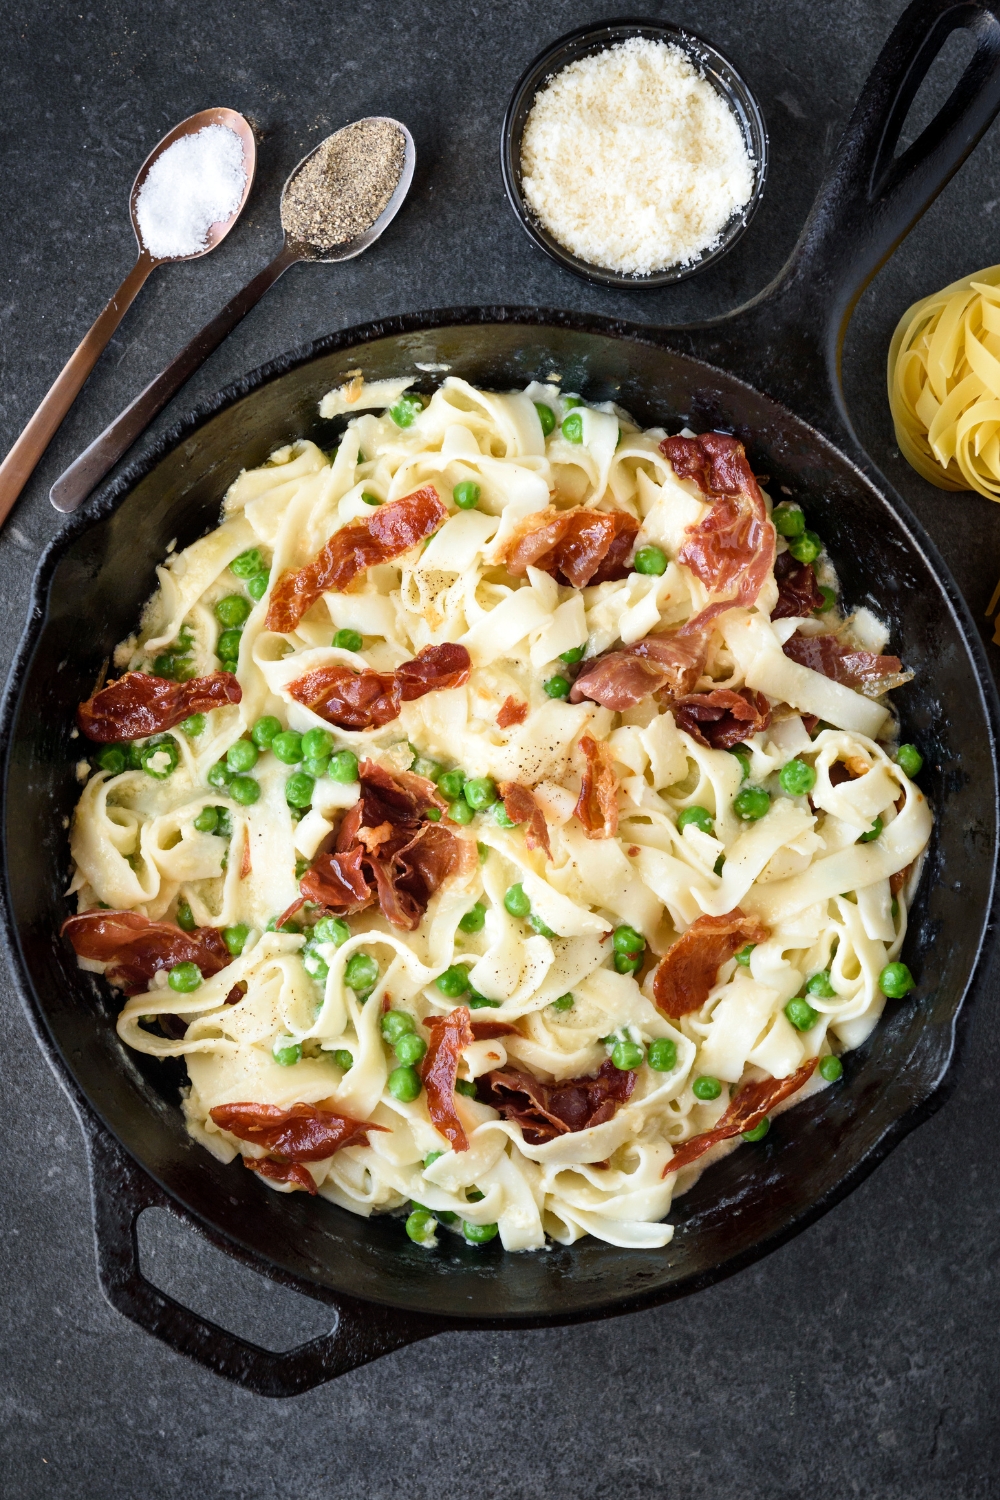 A cast iron skillet filled with cooked pasta mixed with peas and prosciutto in a creamy sauce.